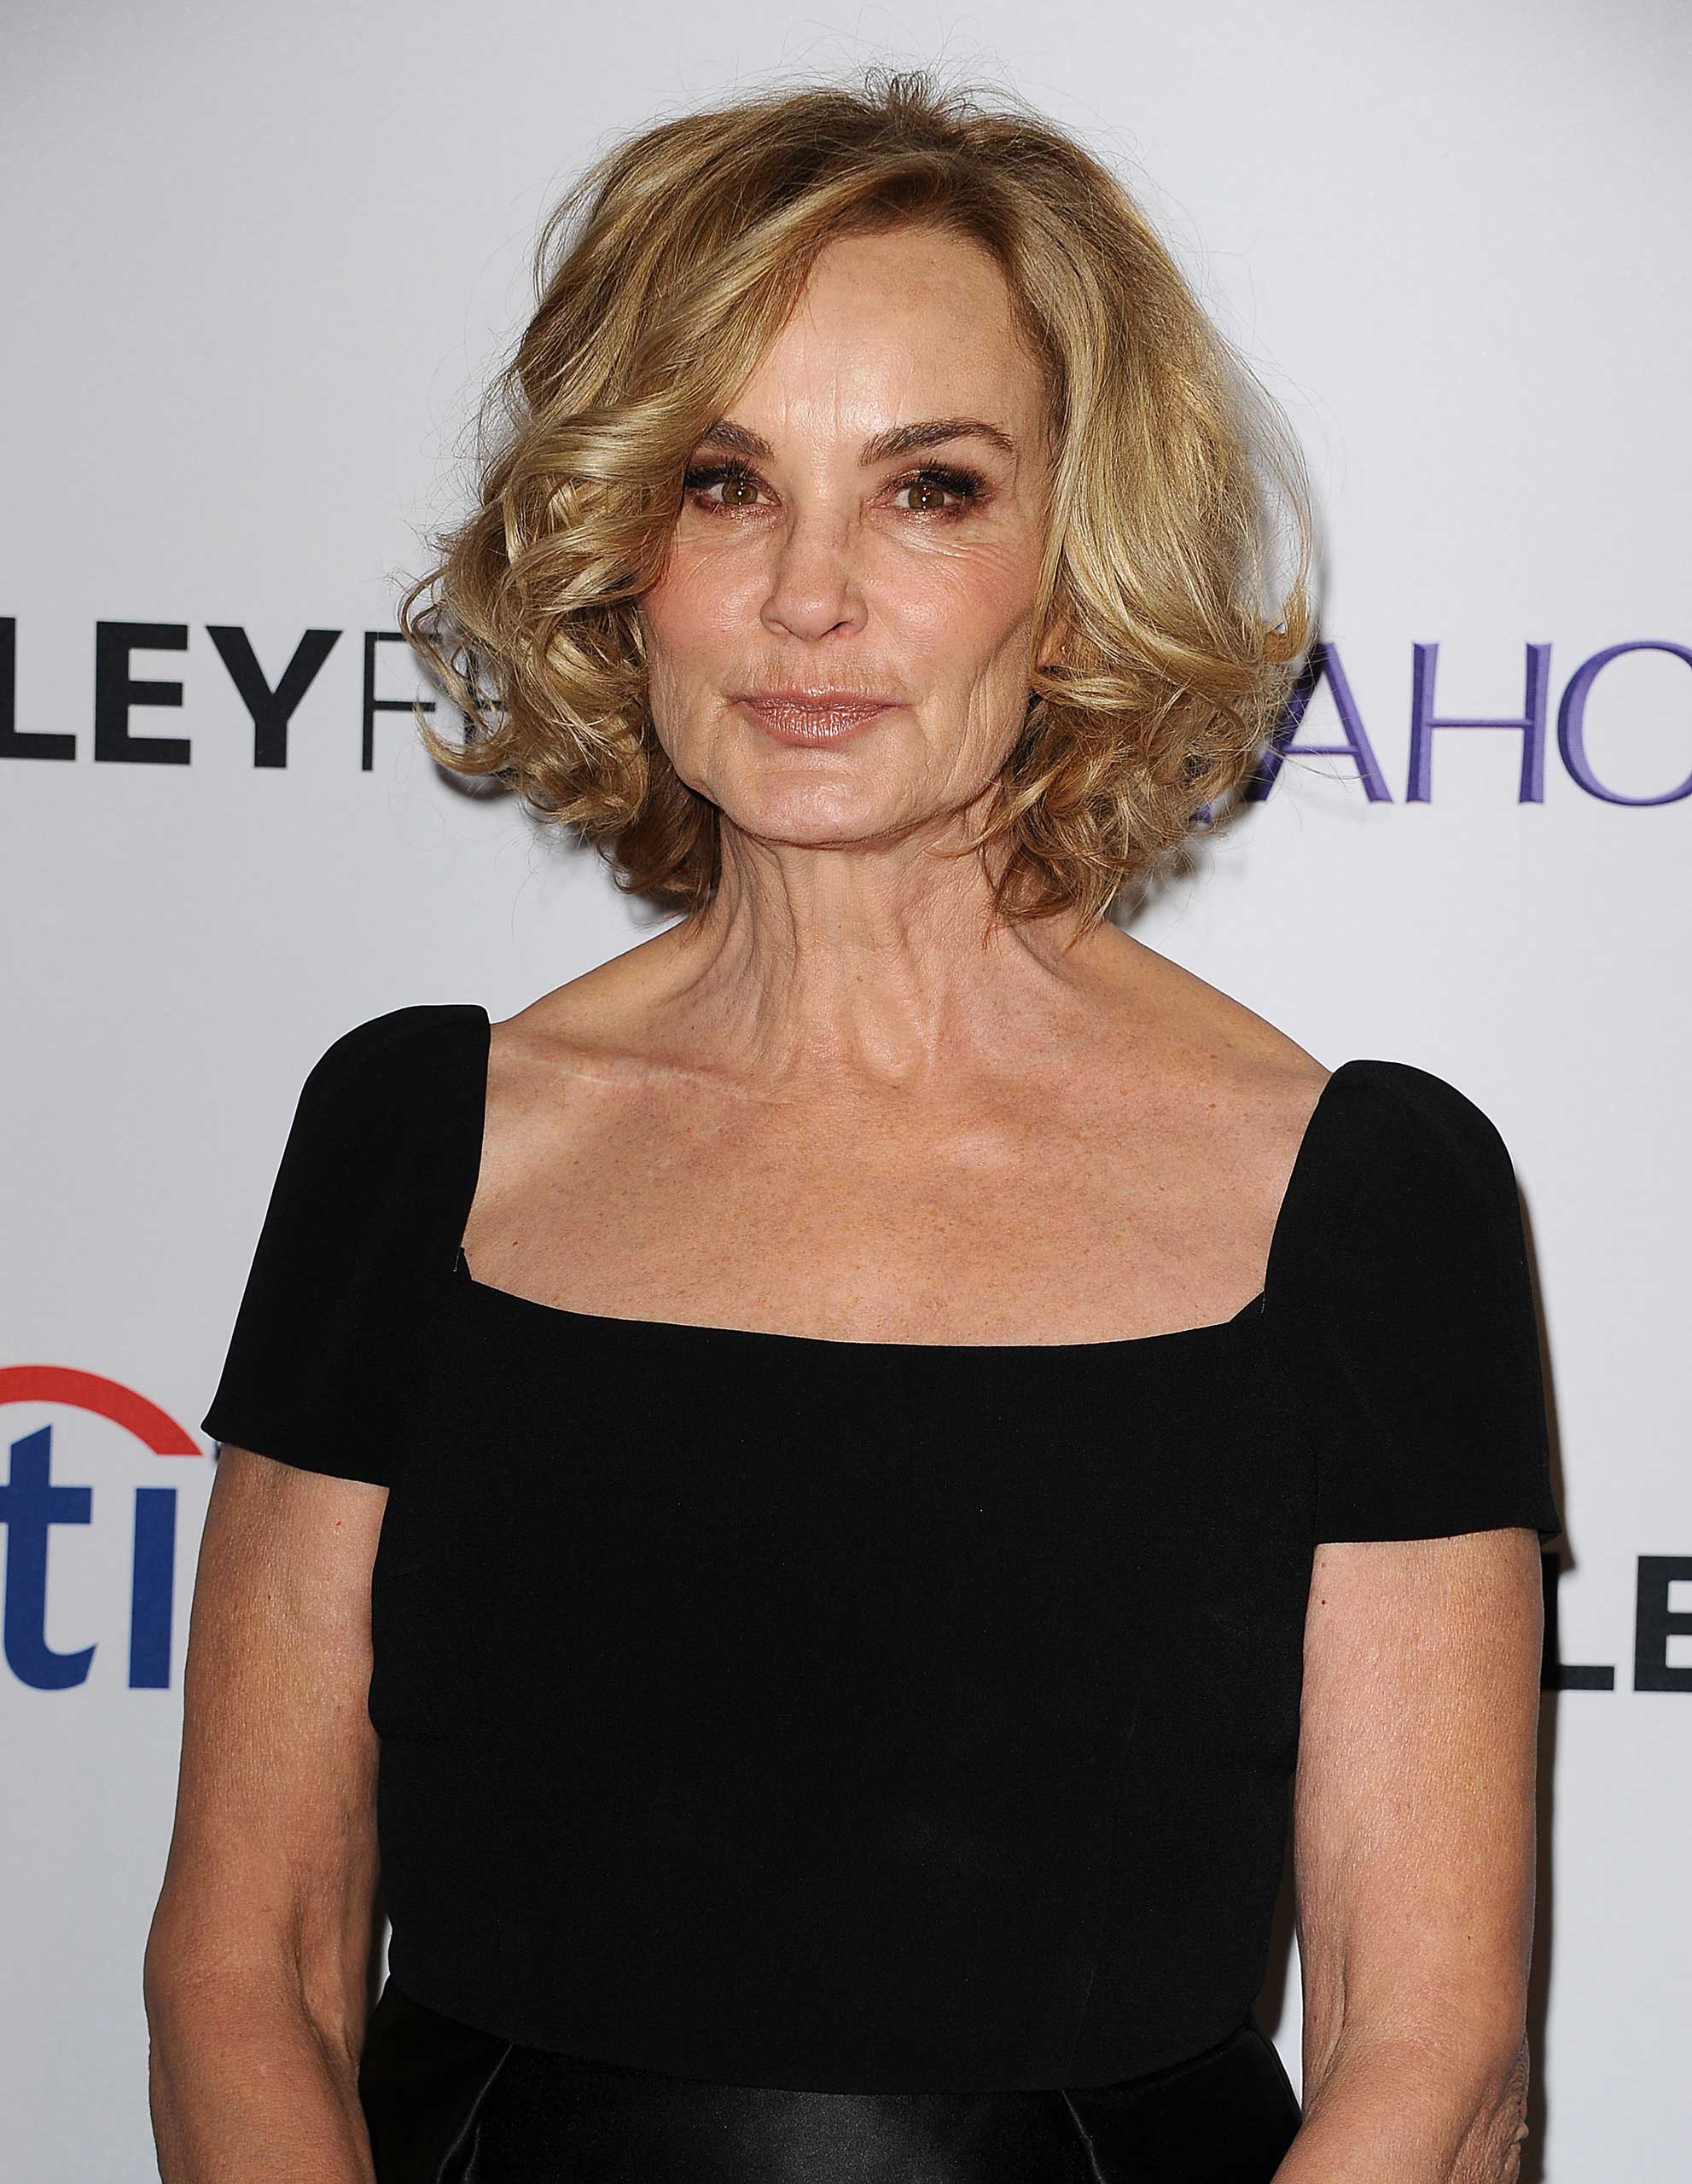 Jessica Lange attends the "American Horror Story: Freak Show" event at the 32nd annual PaleyFest at Dolby Theatre in Hollywood on March 15, 2015 (Jason LaVeris—FilmMagic/Getty Images)